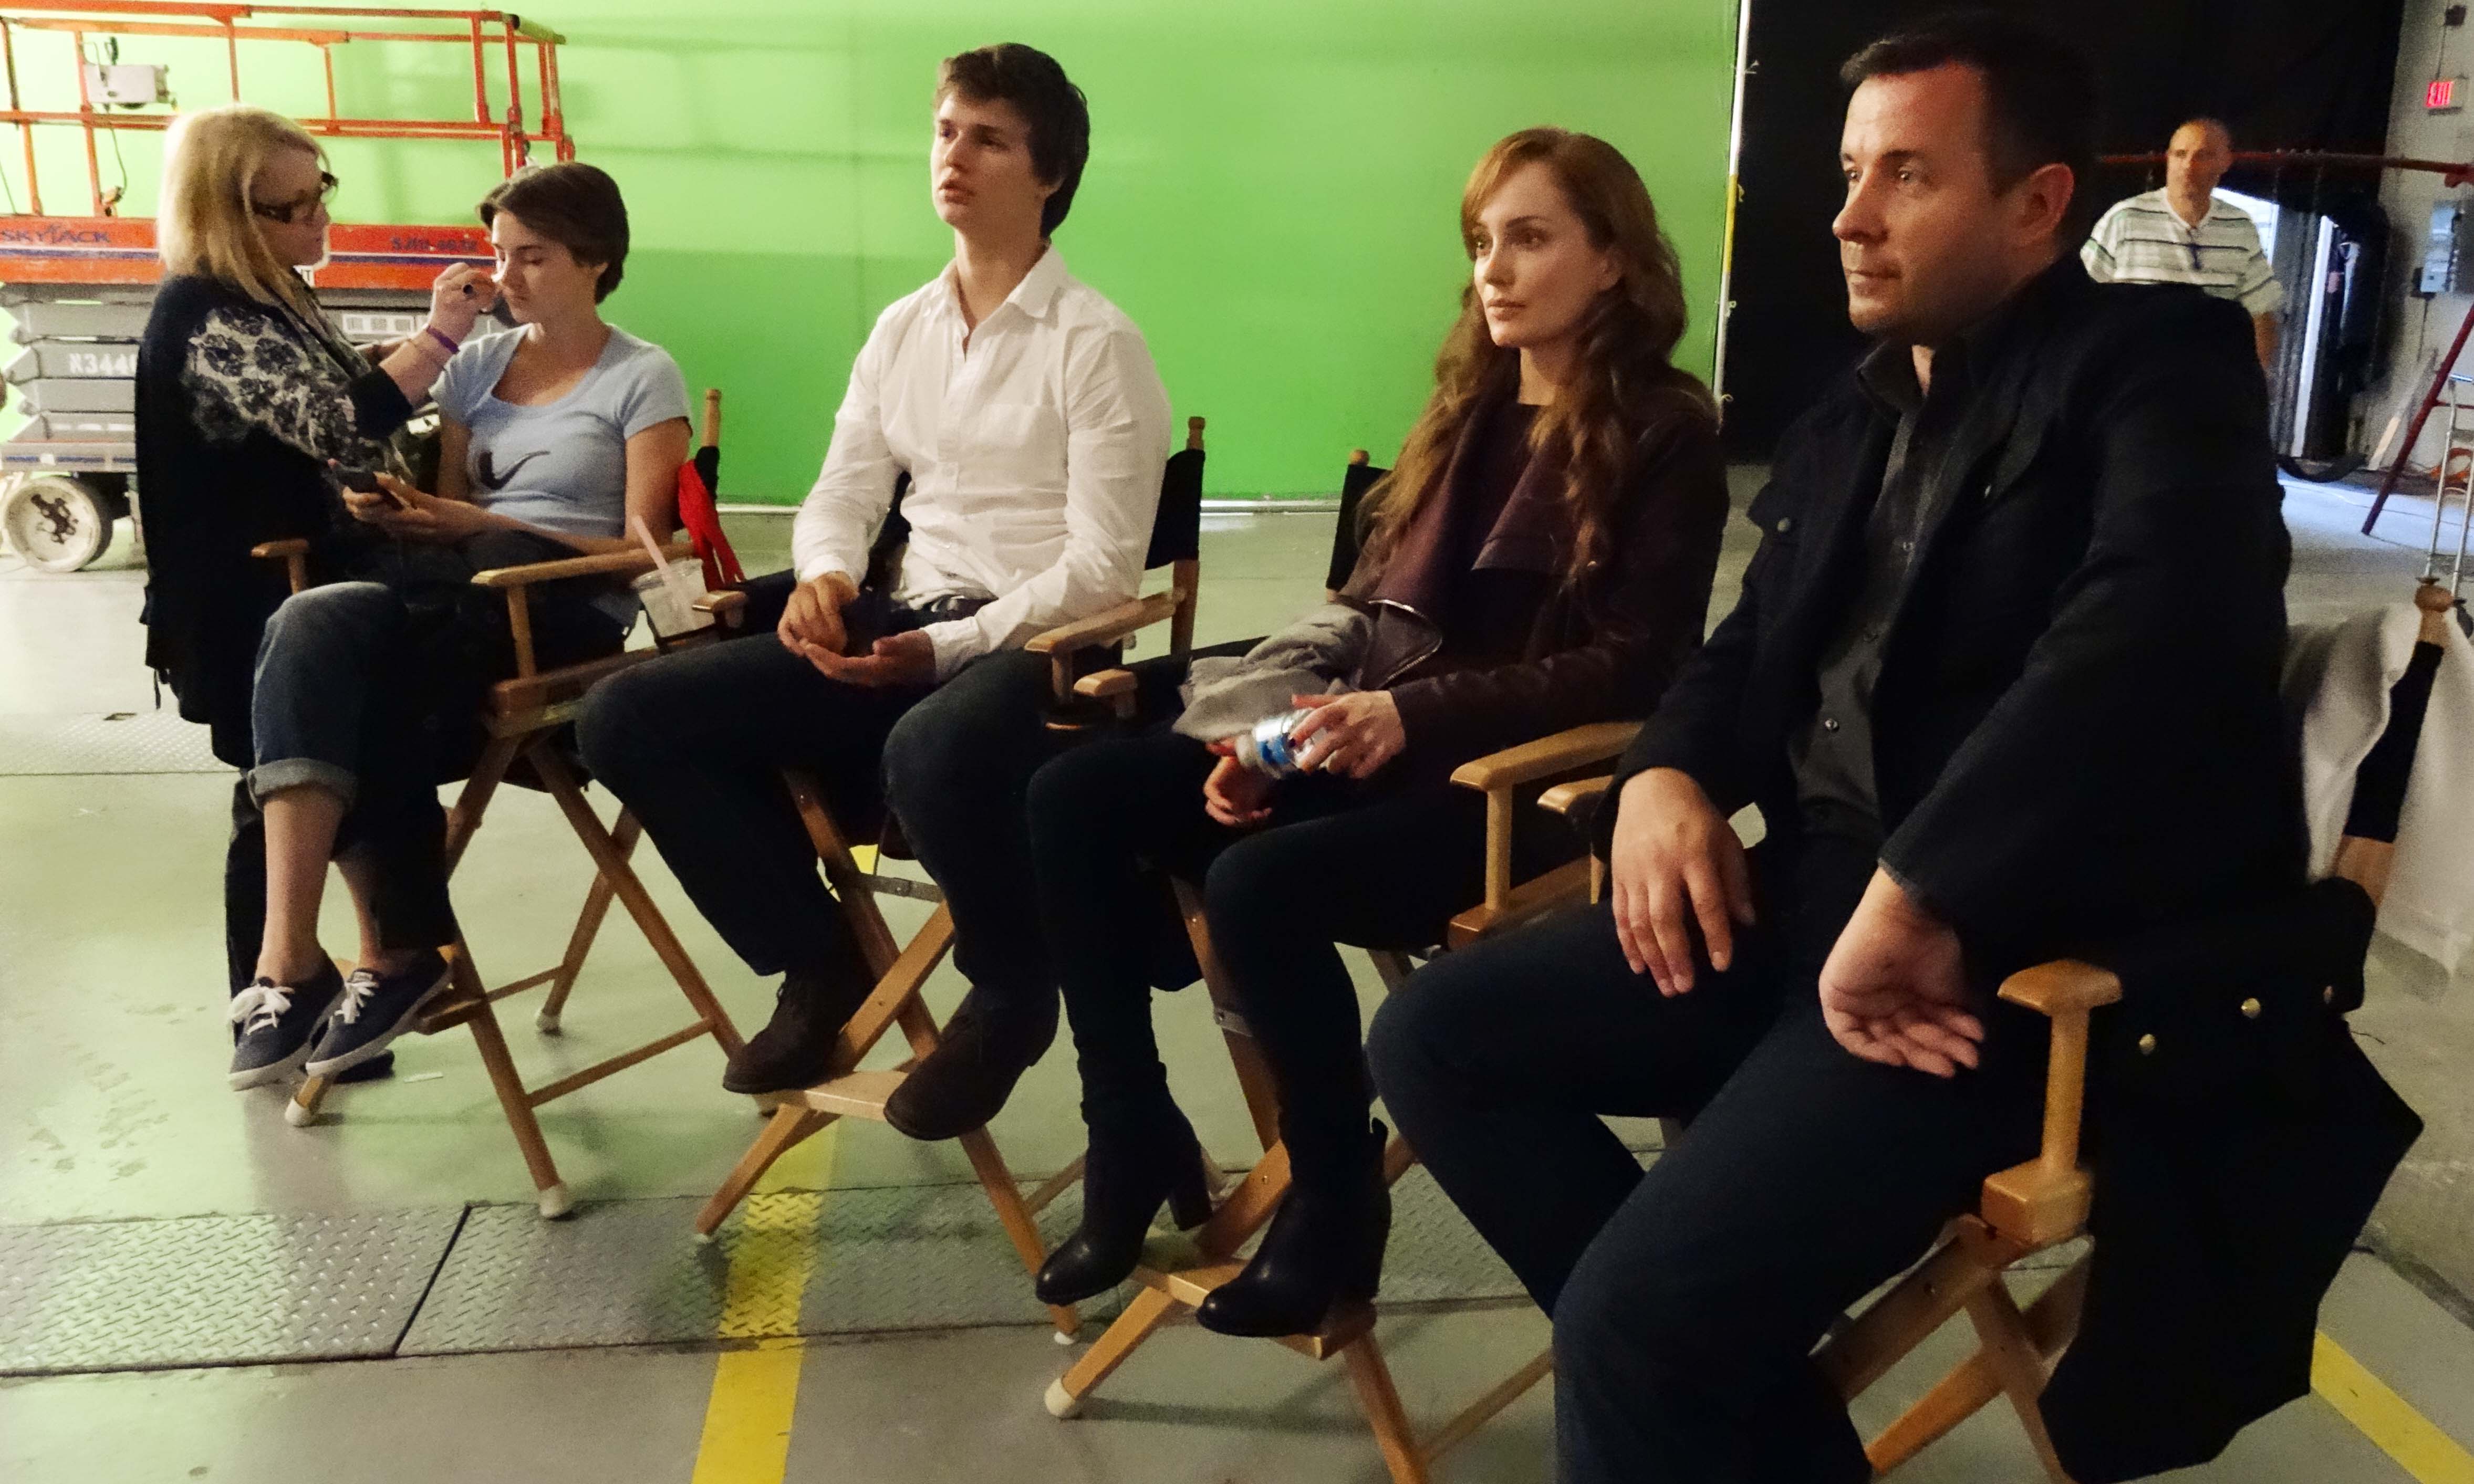 On standby for the next scene. On set of TFIOS with Shailene Woodley, Ansel Elgort and Lotte Verbeek